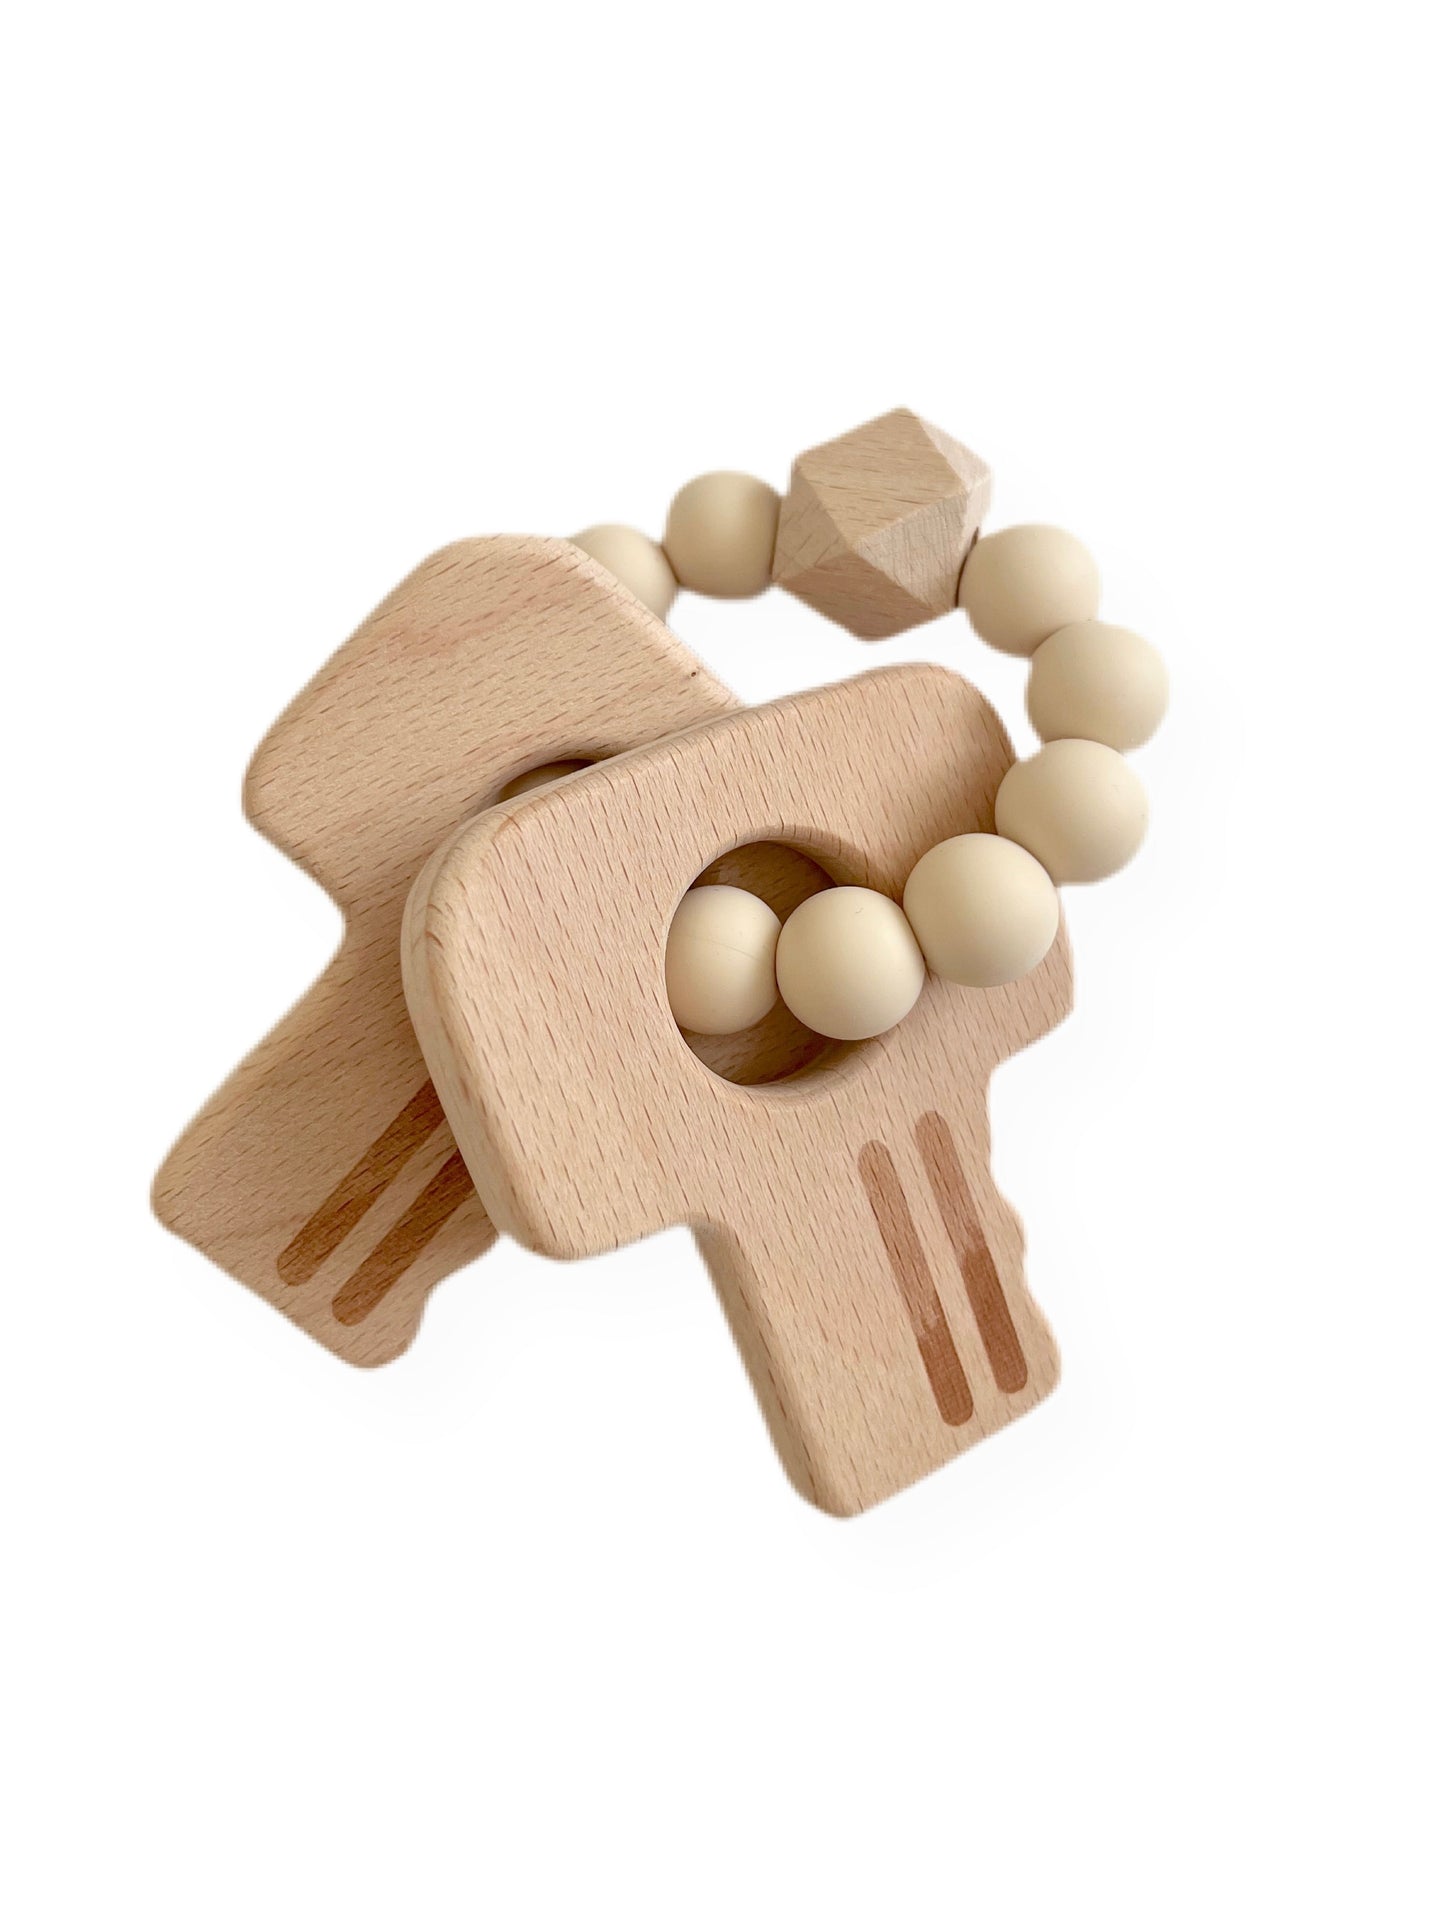 Sand Wooden Key Teether